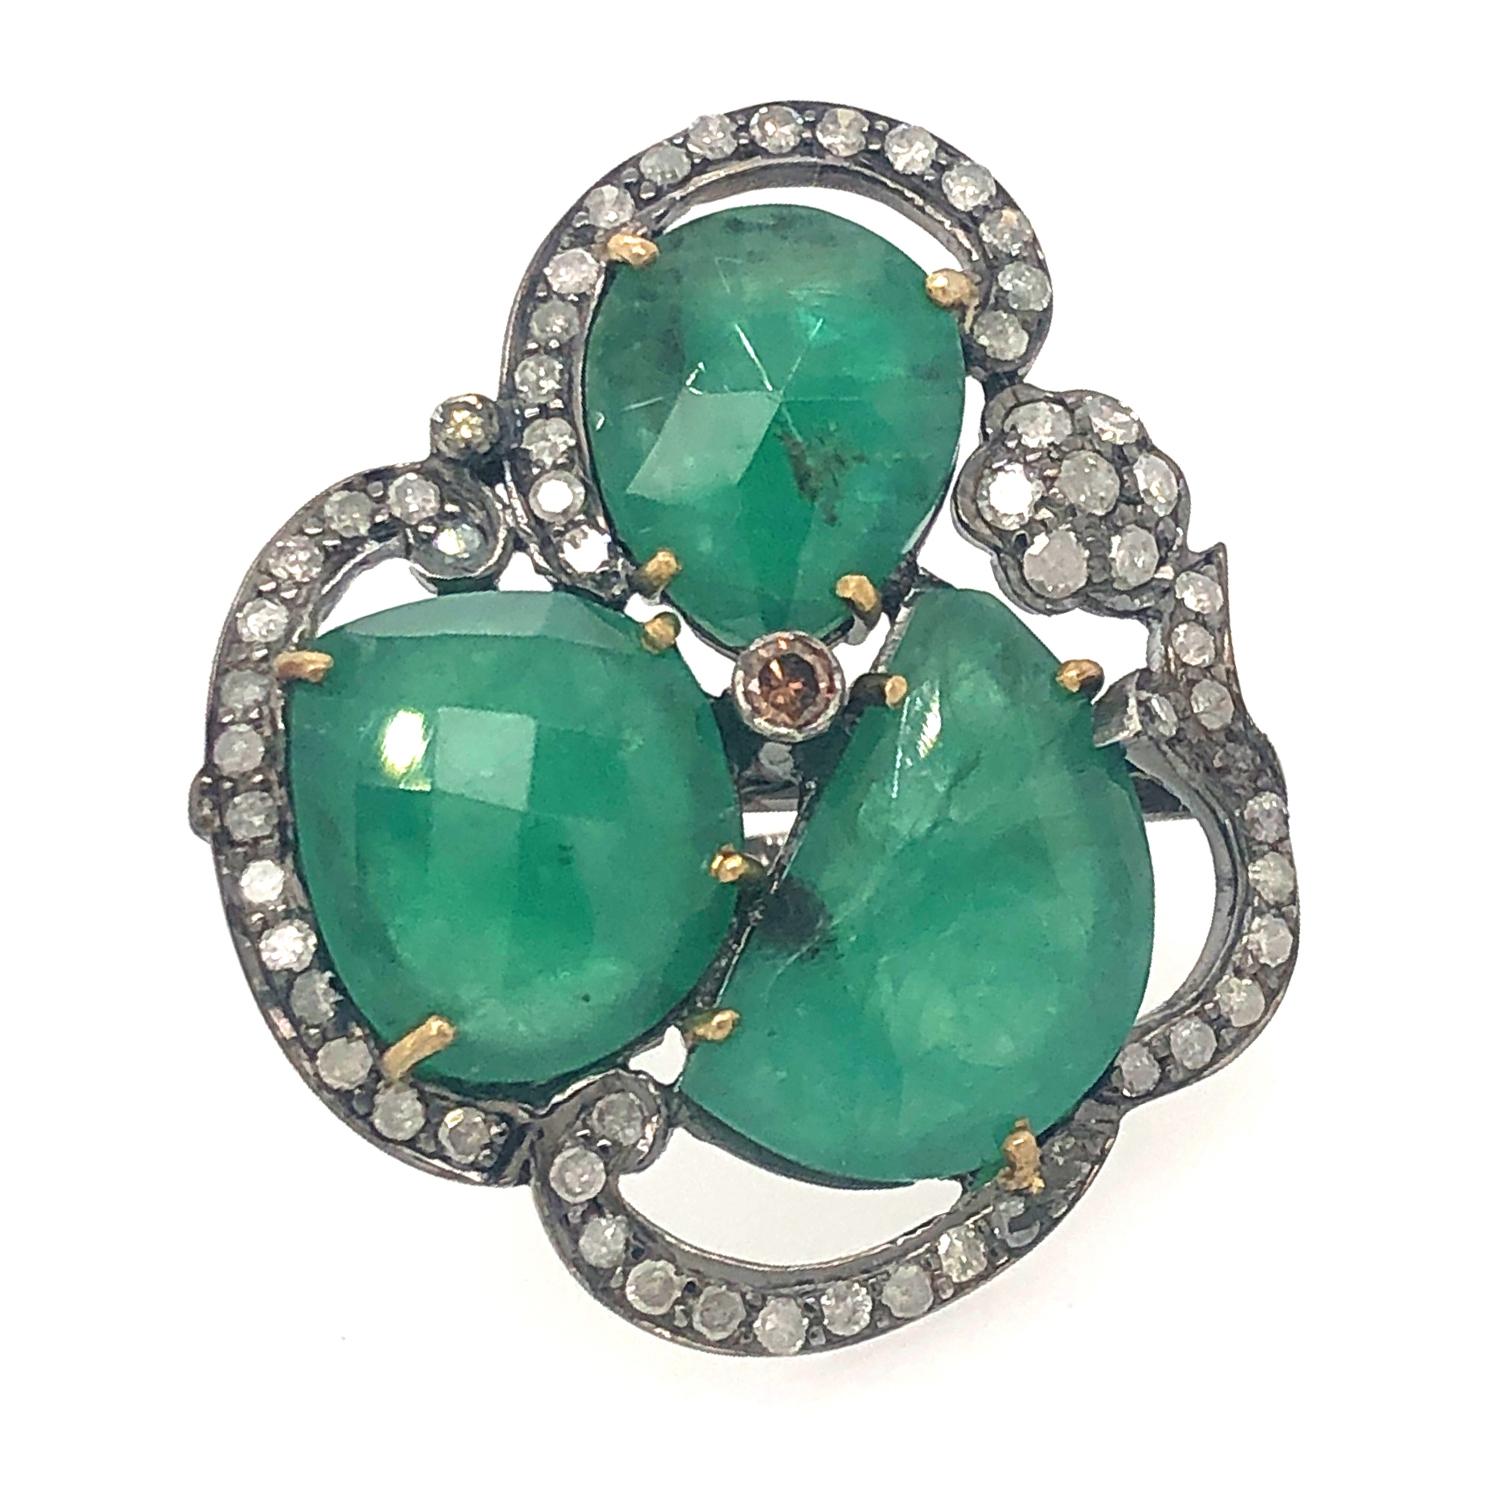 3 Stone Designer Sliced Emerald Ring with Pave diamonds in 18K Gold and Silver is pretty.

Ring Size: 7 ( Can be Sized )


18kt gold:0.89gms
Diamond:0.82cts
Silver:2.5gms
Emerald:6.25cts
